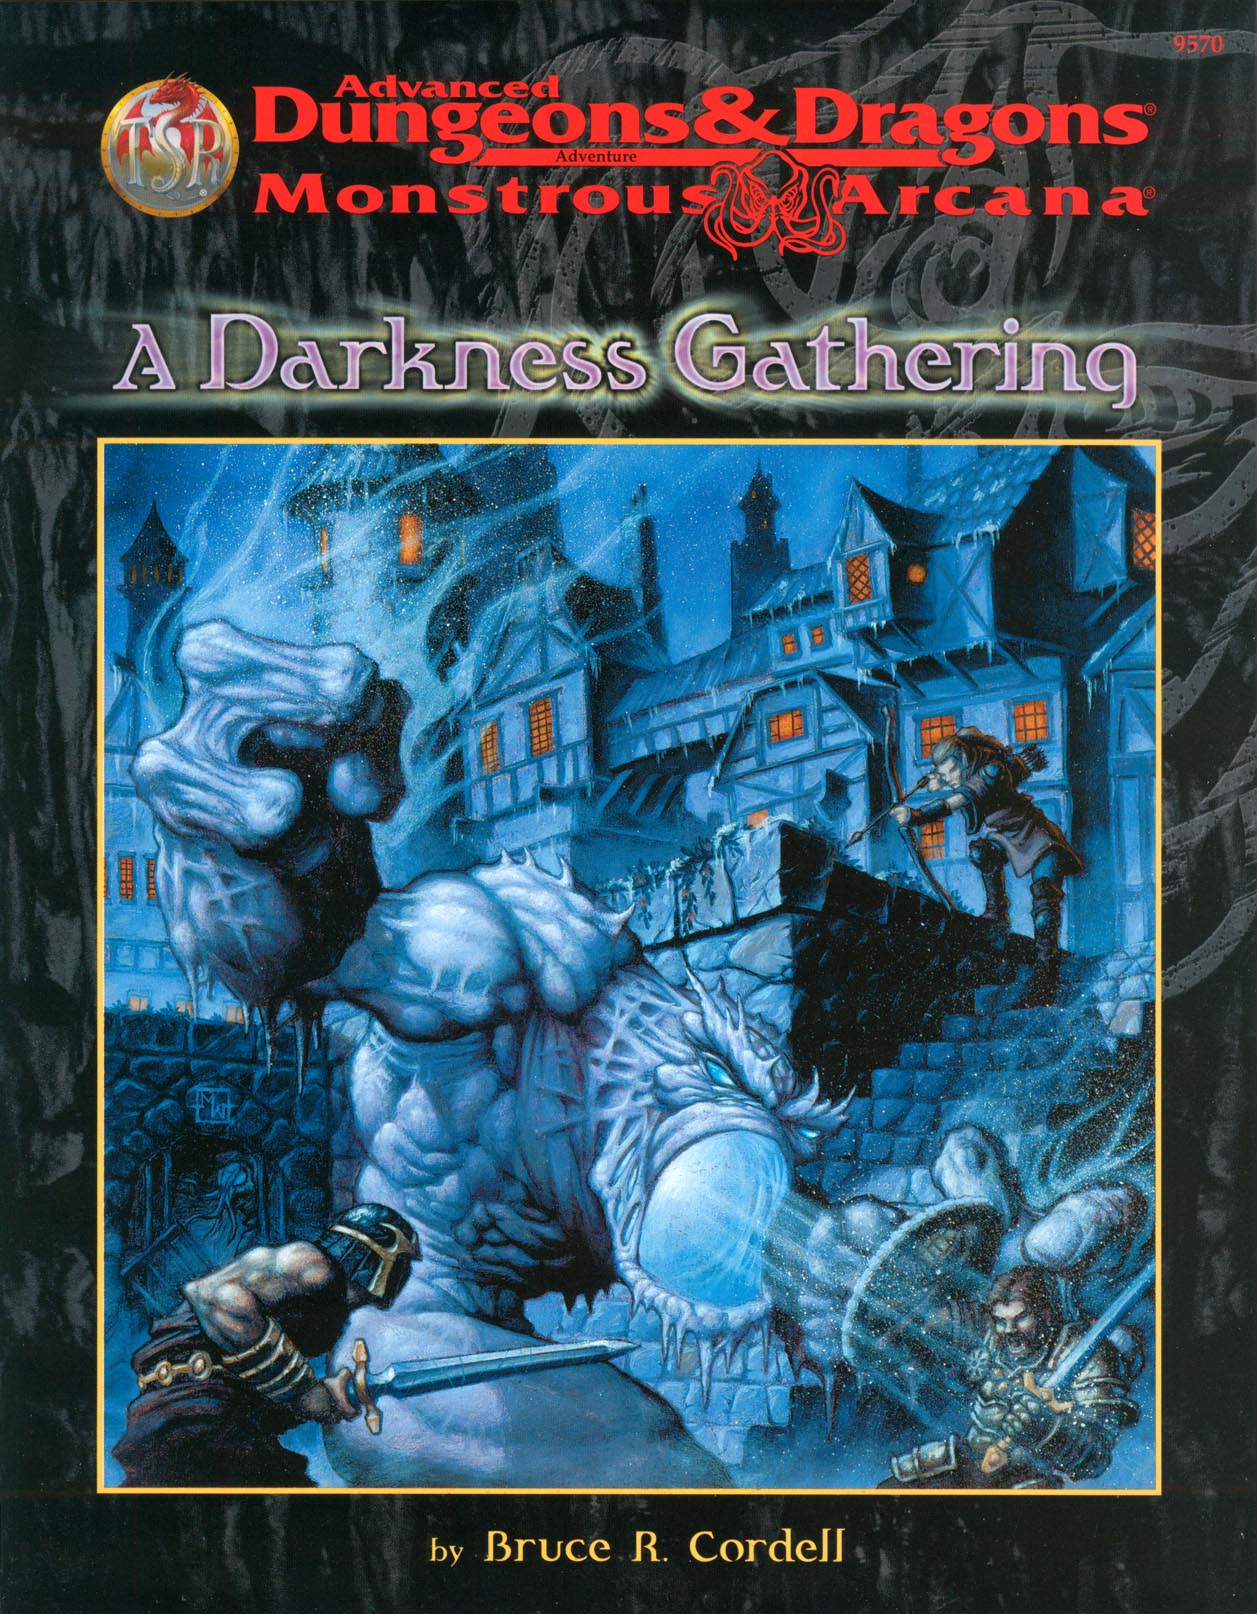 A Darkness GatheringCover art